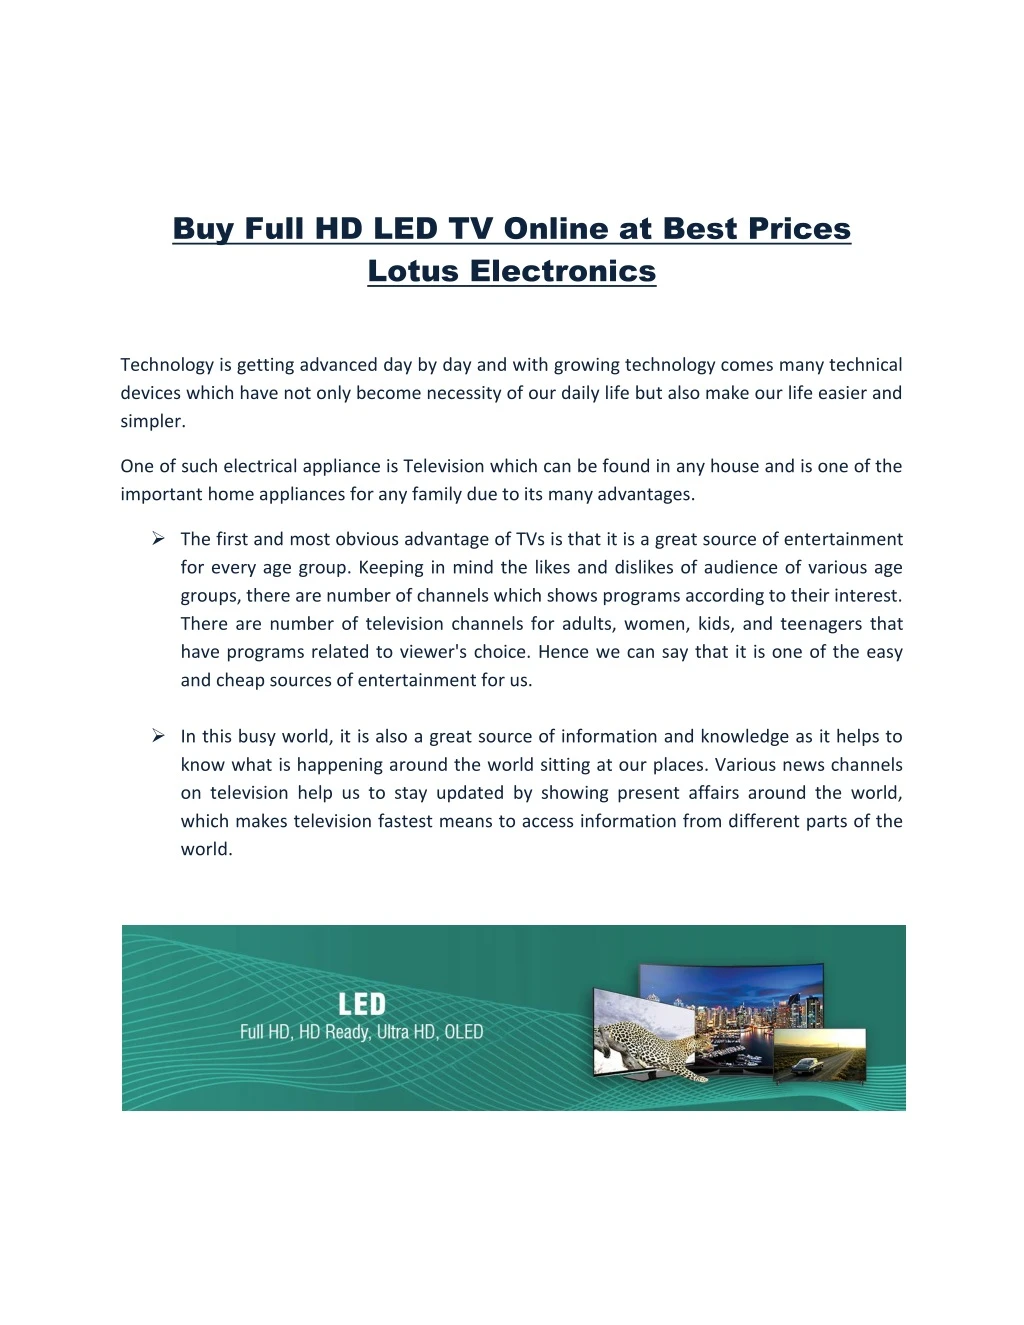 buy full hd led tv online at best prices lotus